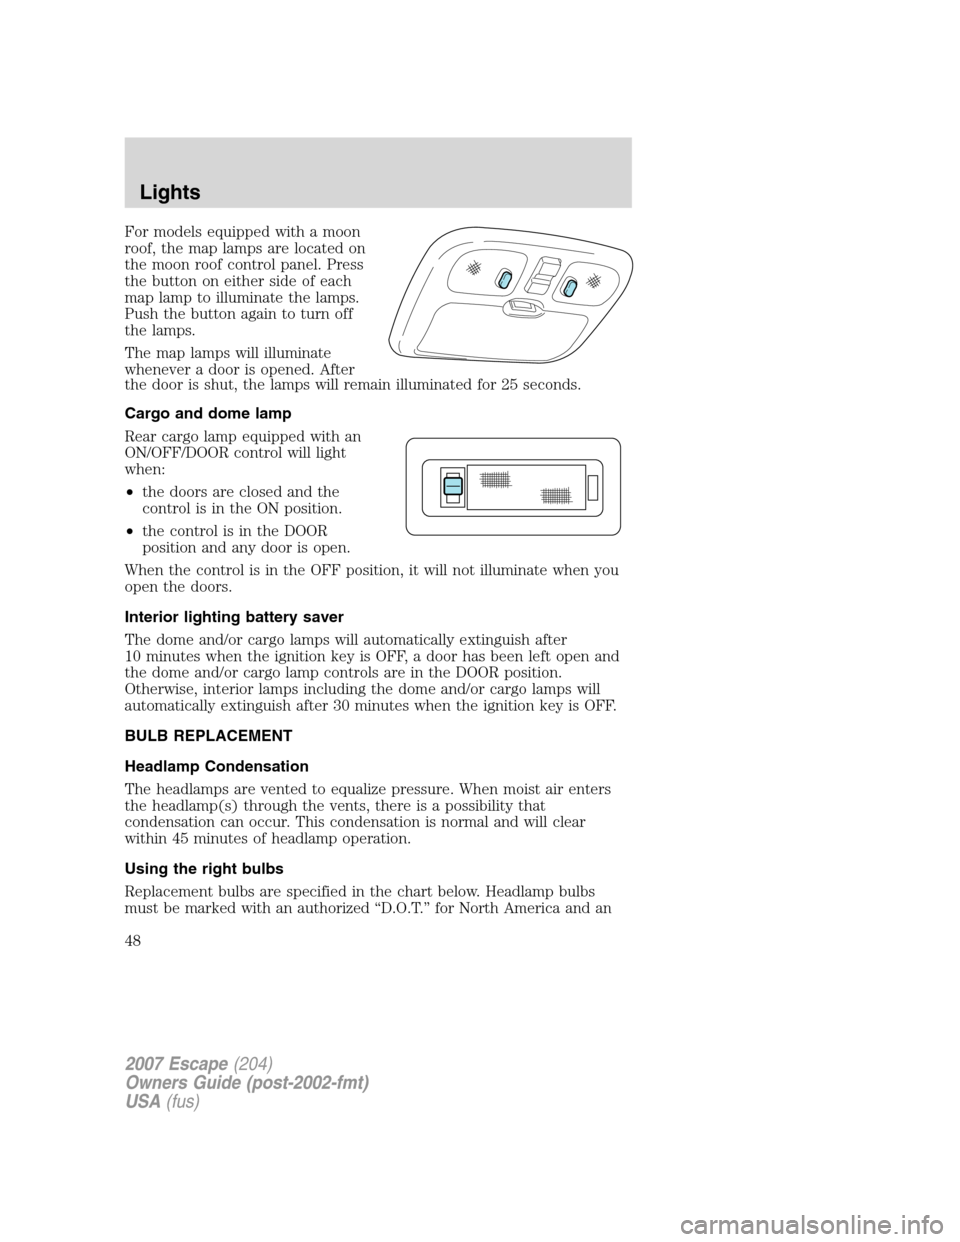 FORD ESCAPE 2007 2.G Owners Manual For models equipped with a moon
roof, the map lamps are located on
the moon roof control panel. Press
the button on either side of each
map lamp to illuminate the lamps.
Push the button again to turn 